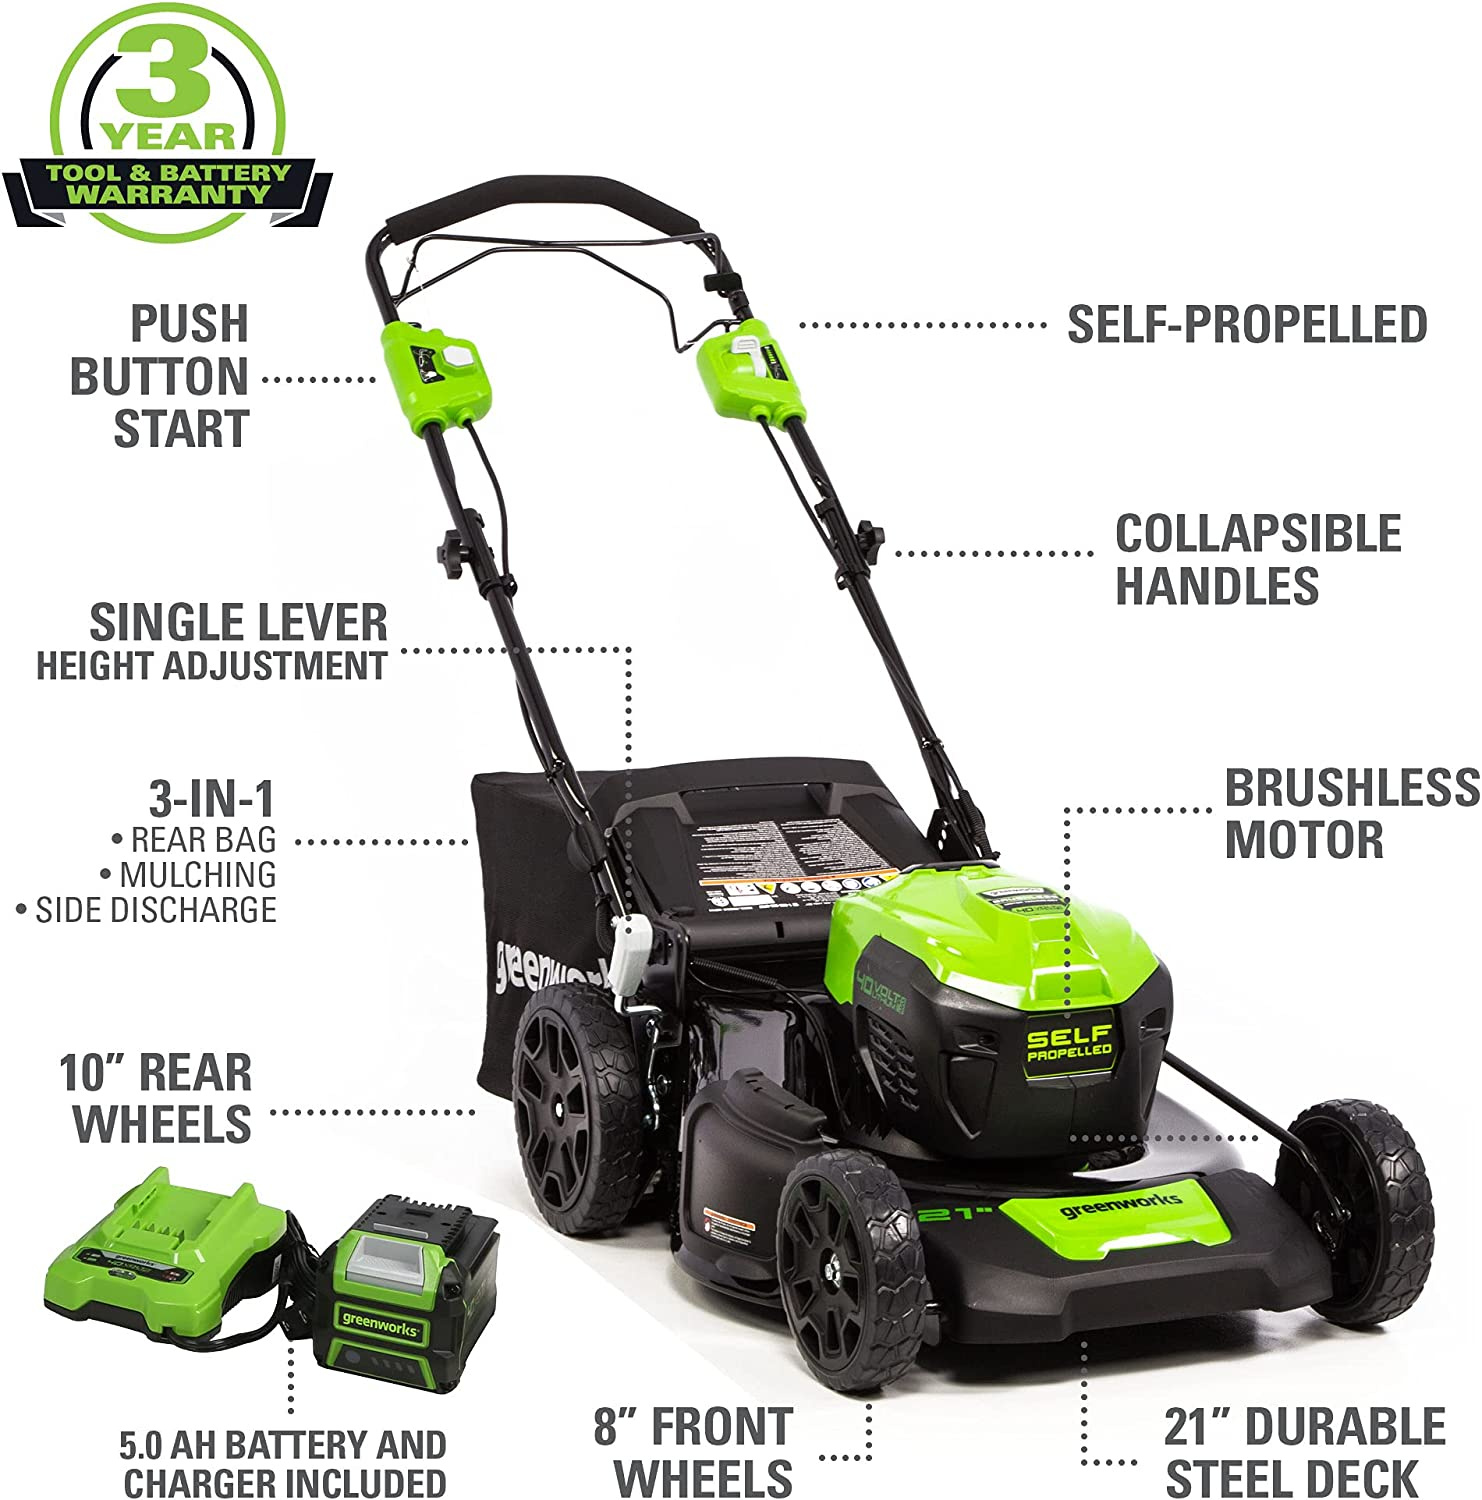 Greenworks 21" 40V Self-Propelled Lawn Mower with 5.0 Ah Battery & Charger​ 2516402 - image 3 of 16